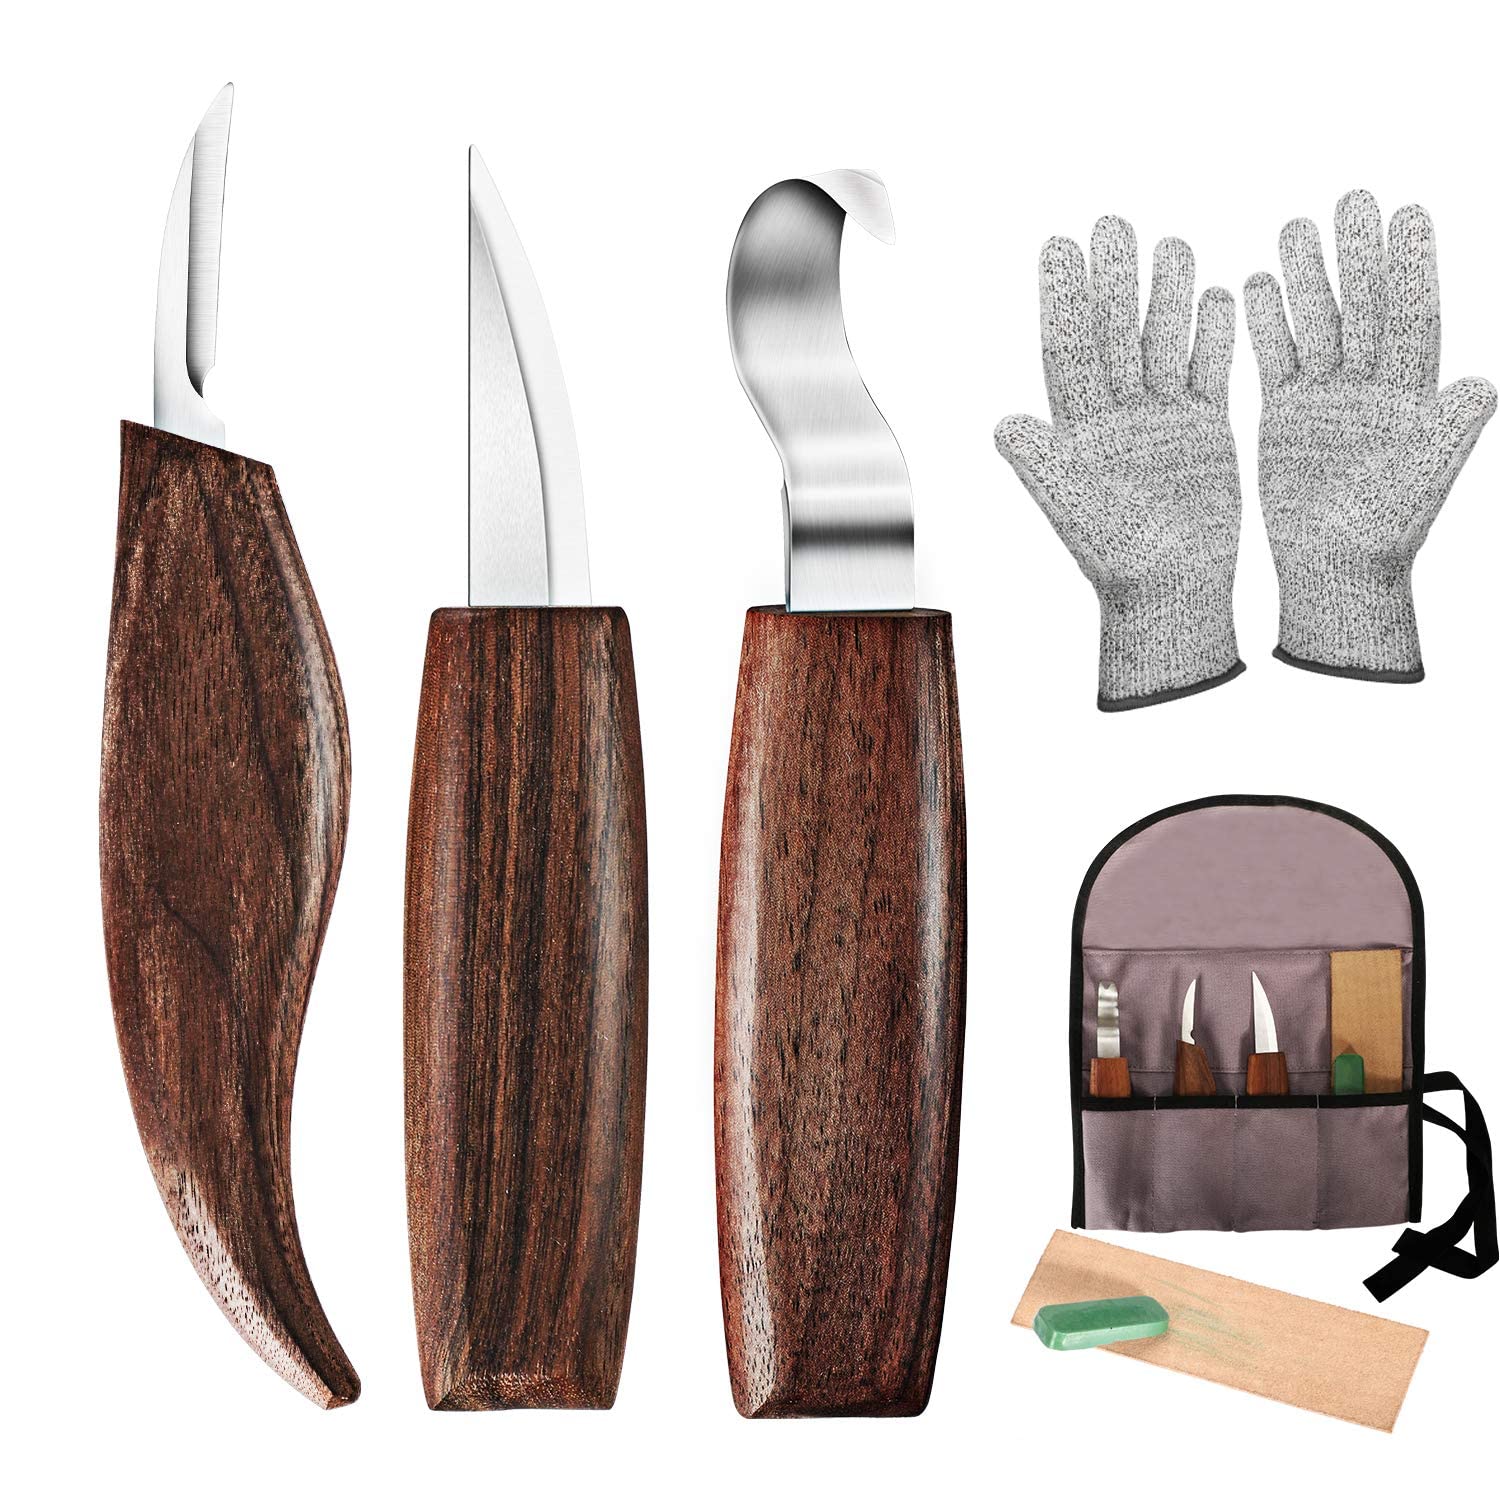 Autimatic Wood Carving Tools Set+Cut Resistant Gloves,Spoon Carving Hook  Knife, Wood Carving Whittling Knife,Chip Carving Detail Knife, Leather  Strop and Polishing Compound (Group 2)